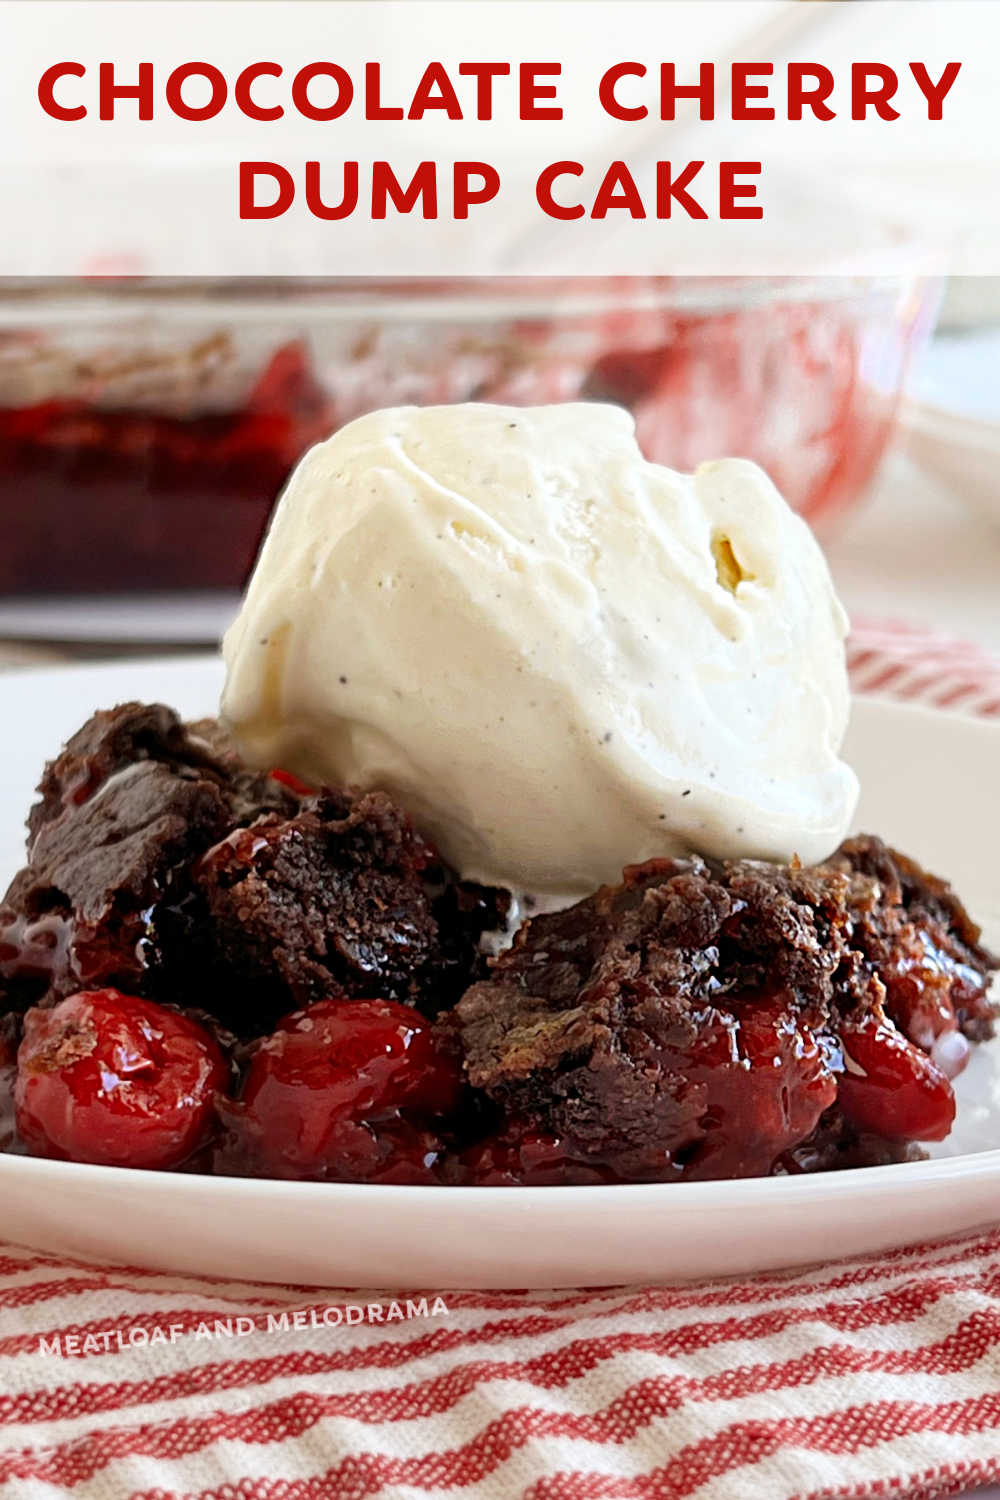 Chocolate Cherry Dump Cake is an easy chocolate dessert made with chocolate cake mix, cherry pie filling and butter. Simple and delicious! This easy recipe makes one of the best desserts ever!  via @meamel